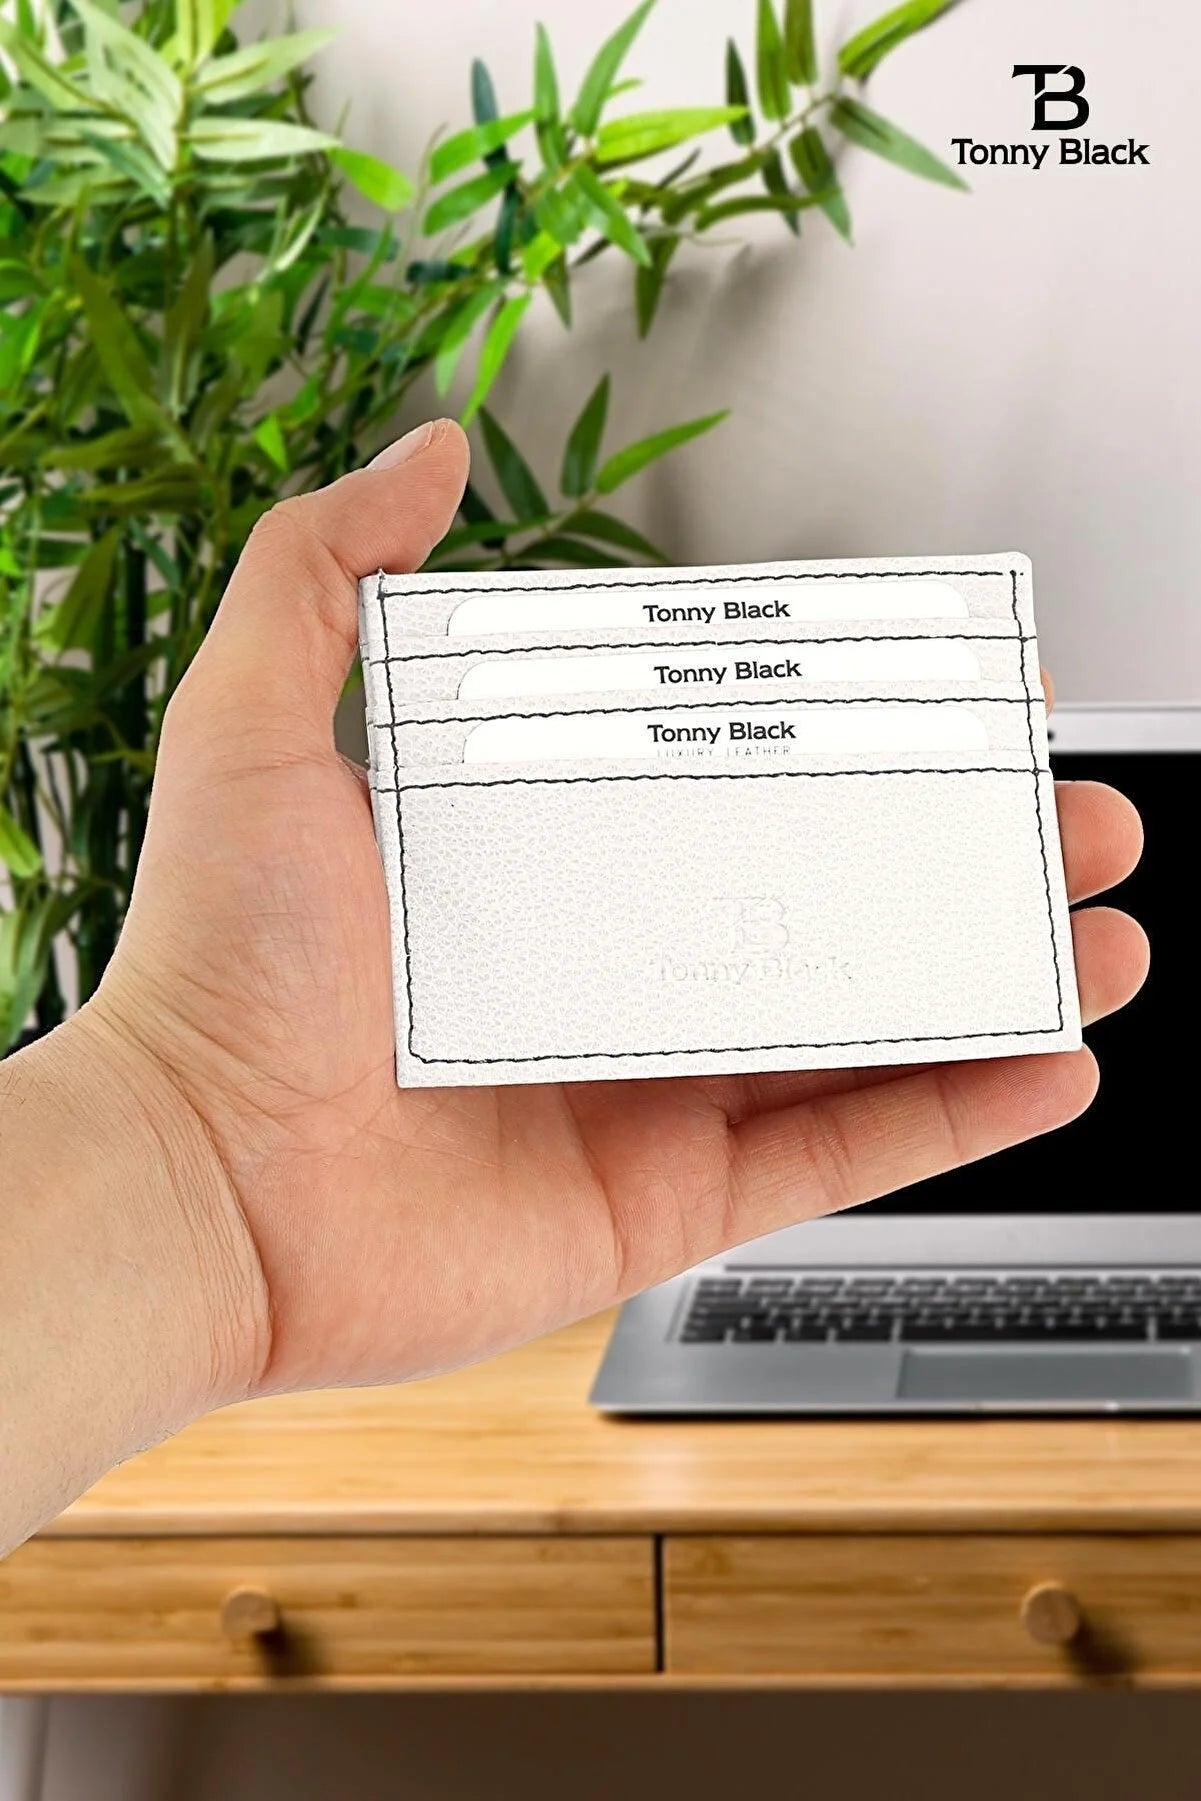 Original Boxed Unisex Super Slim Leather Thin Model Credit Card & Business Card Holder in White